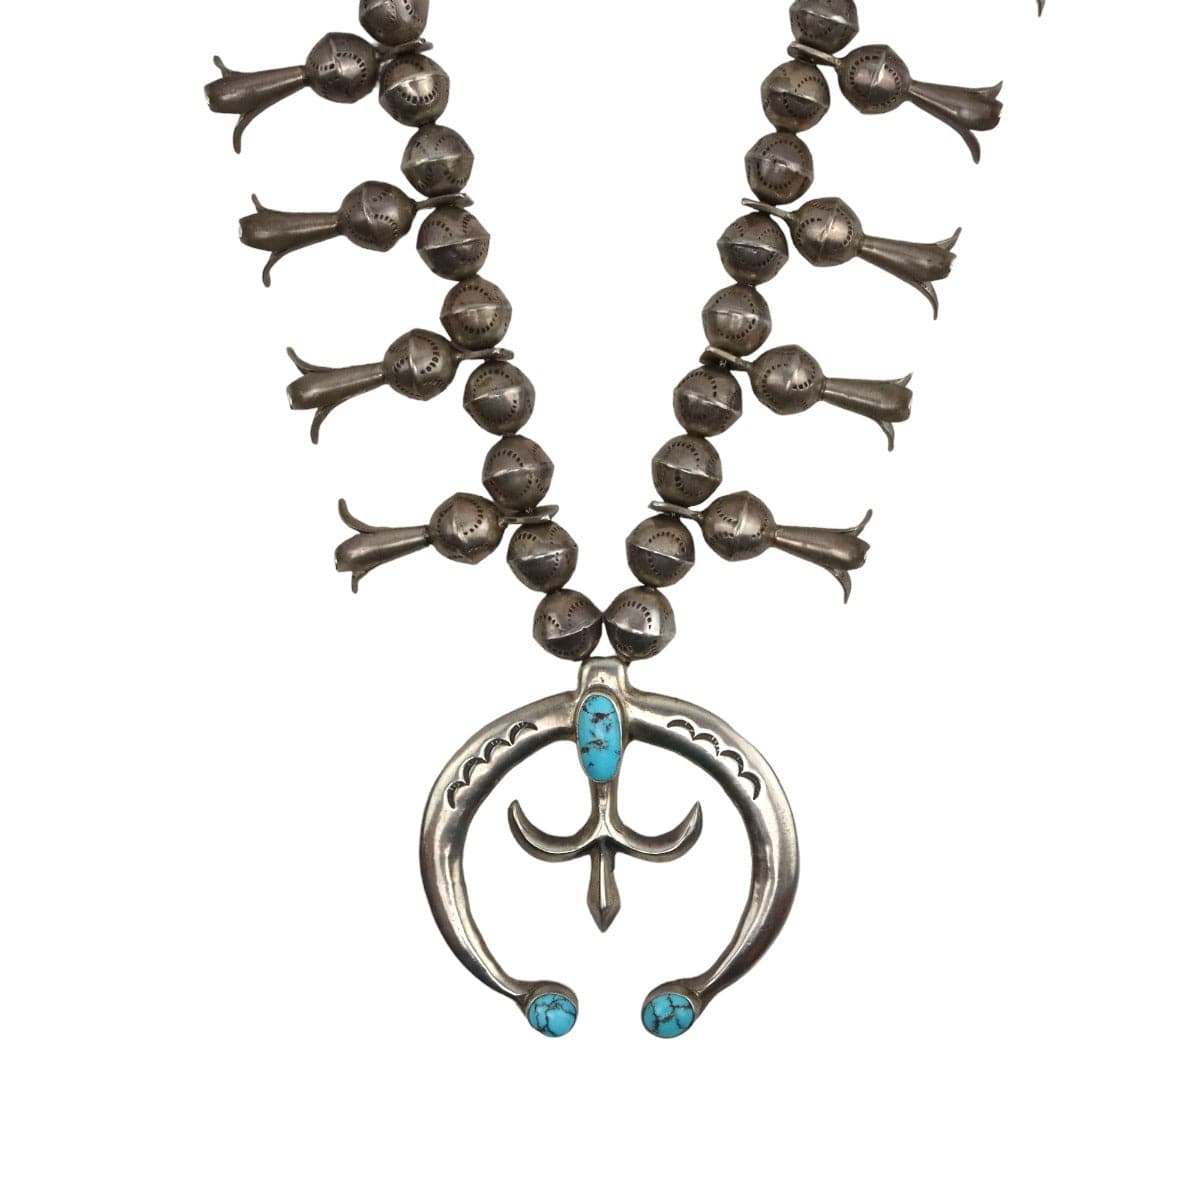 Navajo Number 8 Turquoise and Silver Beaded Squash Blossom Necklace c. 1940-50s, 25" length (J15076-CO-038) 1